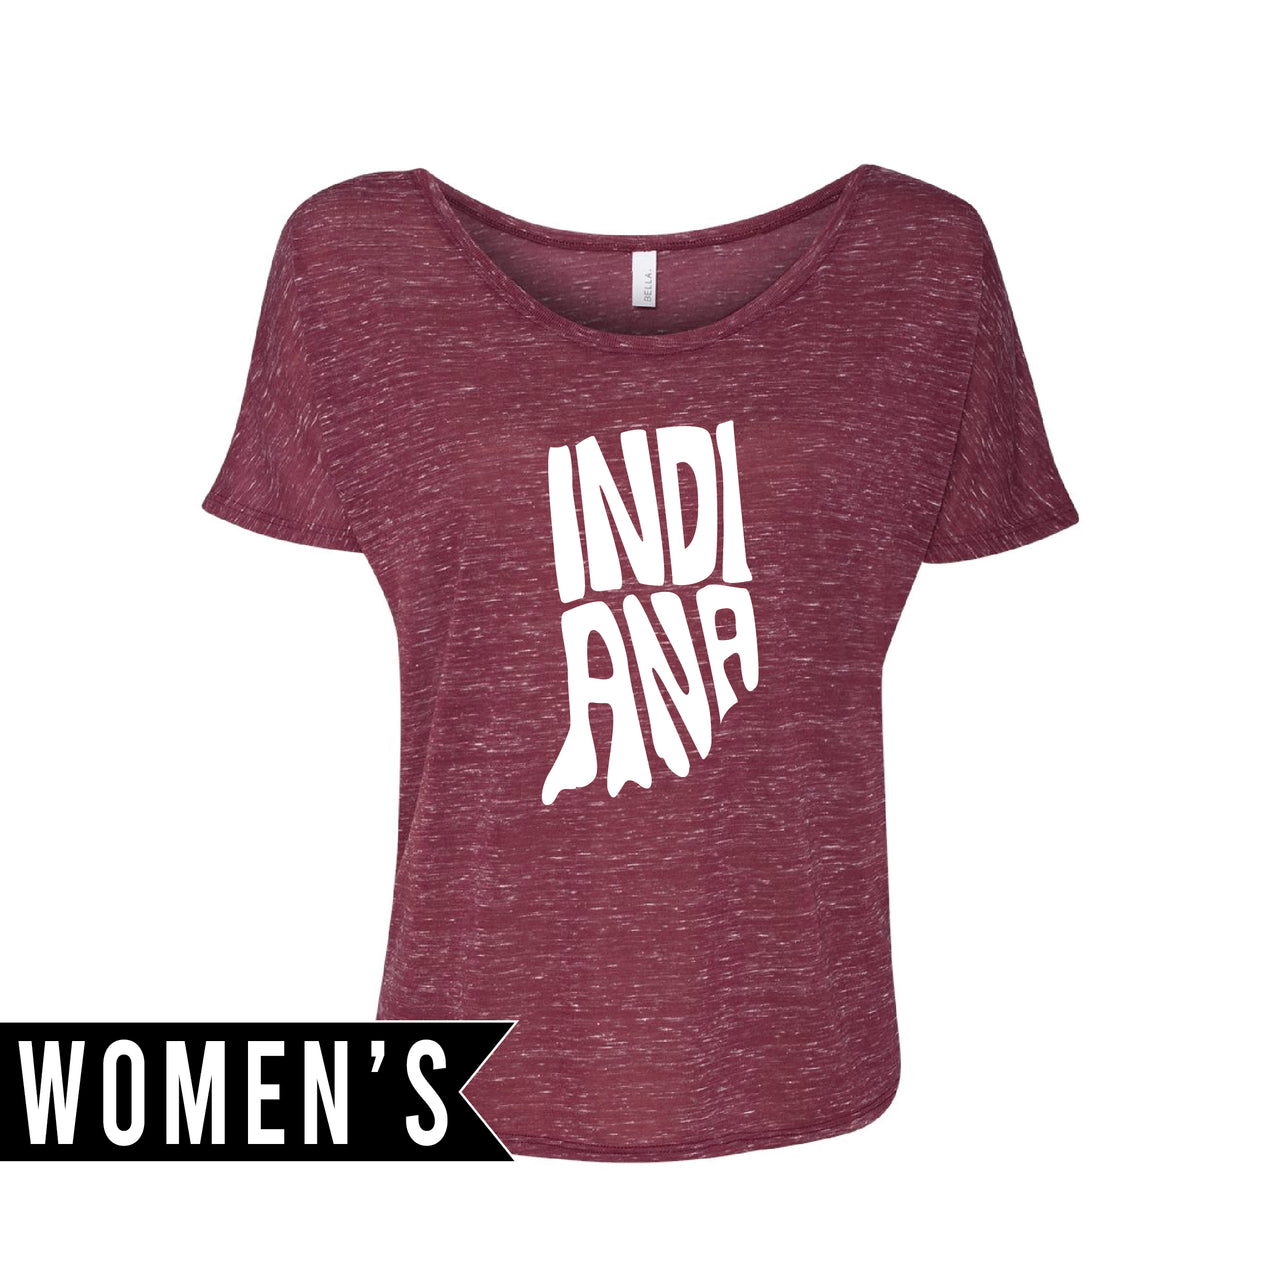 BELLA + CANVAS - Women’s Slouchy Tee - Indiana Letter